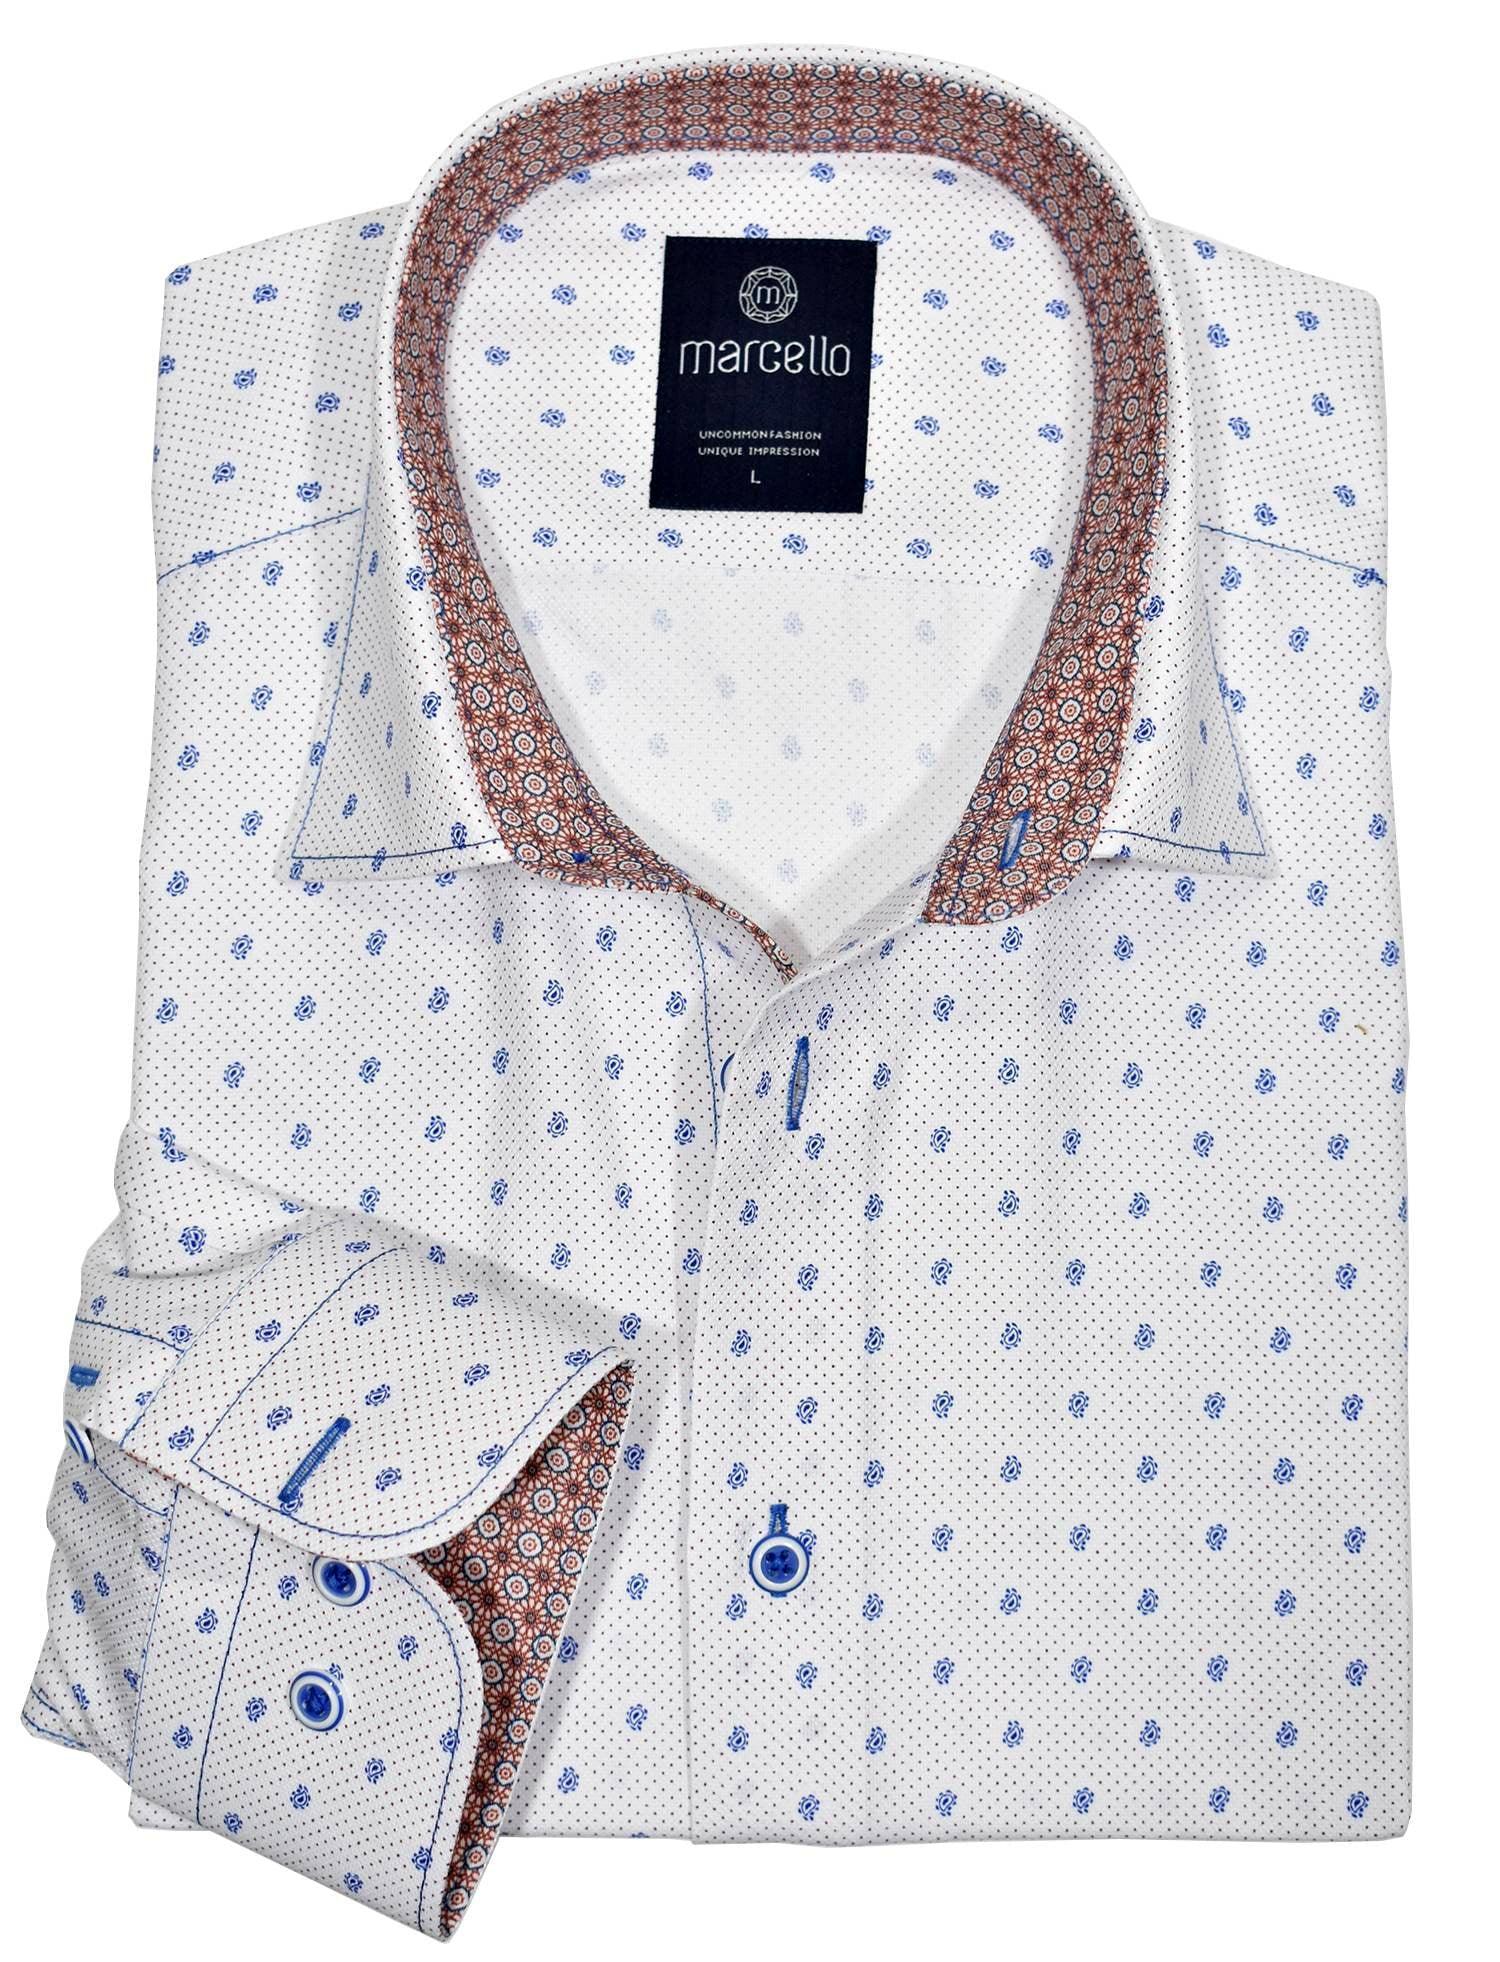 Ultra soft cotton. Fine royal oxford jacquard fabric. Contrast matched stitchwork. Custom selected buttons. 2 button signature cuffs. Classic shaped fit. Shirt by Marcello Sport